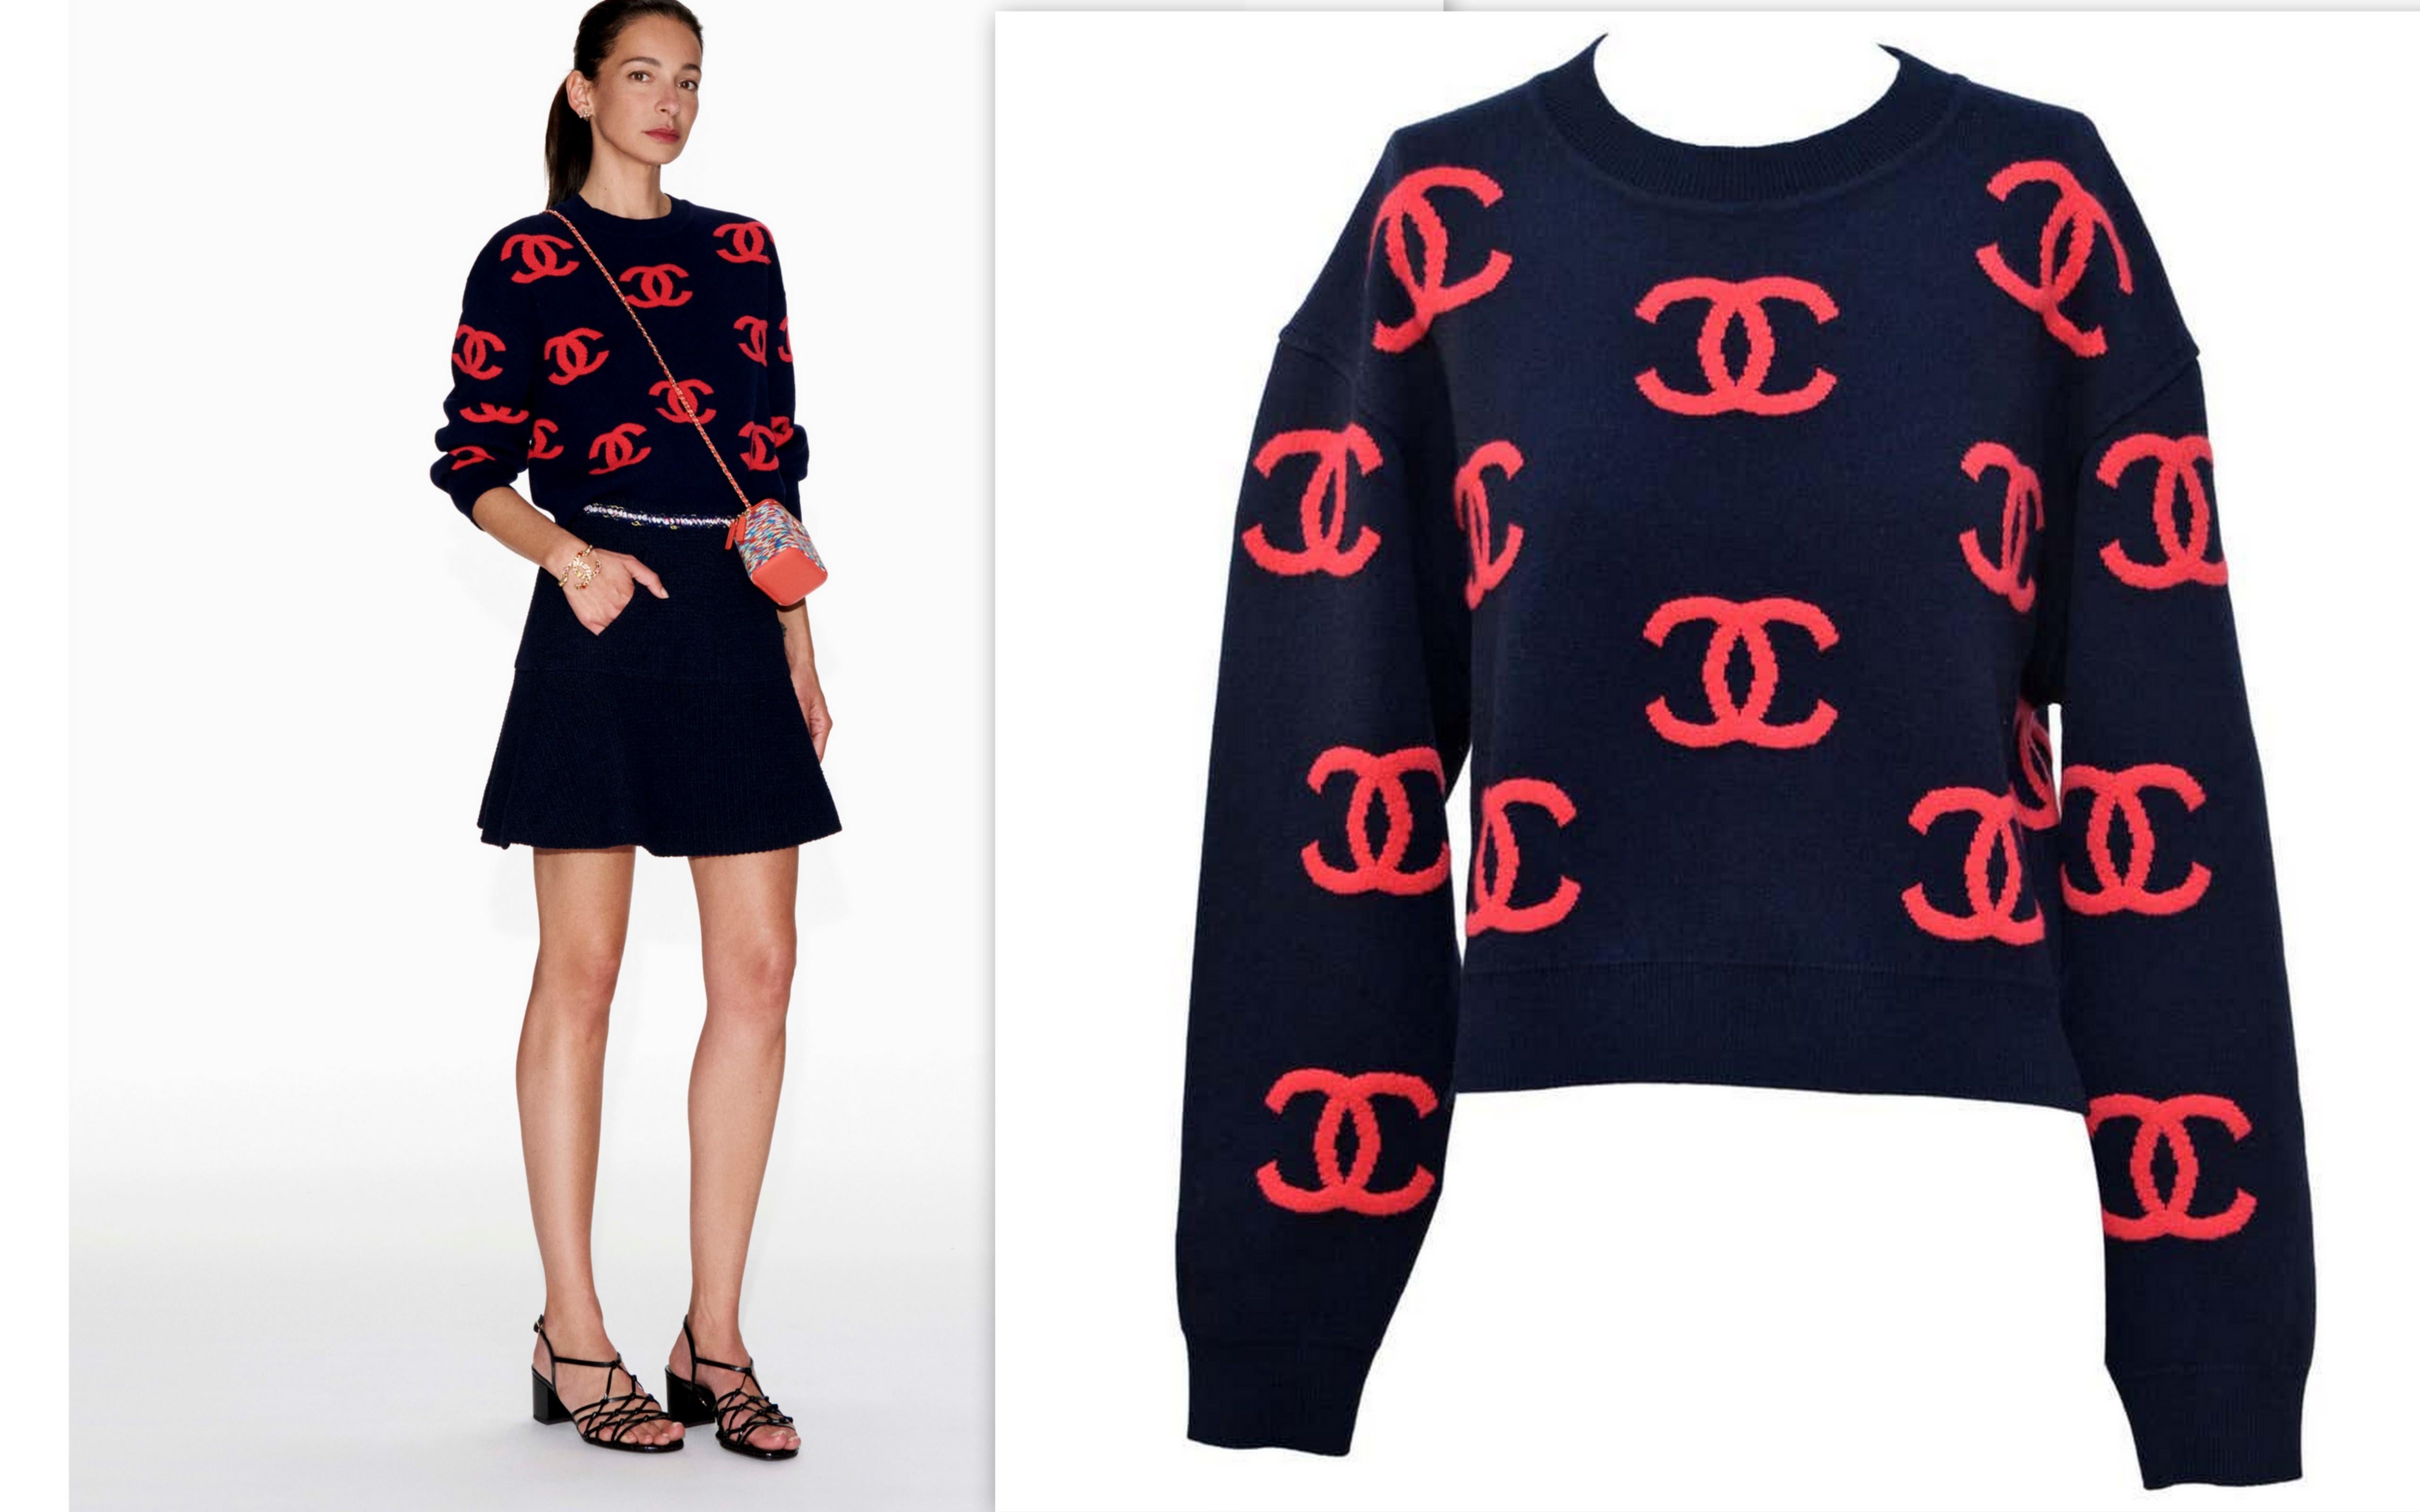 100% authentic Chanel sweater .Original receipt from Chanel available to purchaser upon request.
New with tags and Chanel  pouch
Size 38
Main base color in person is dark blue.Style is cropped .
Please familiarize yourself with Chanel fit before